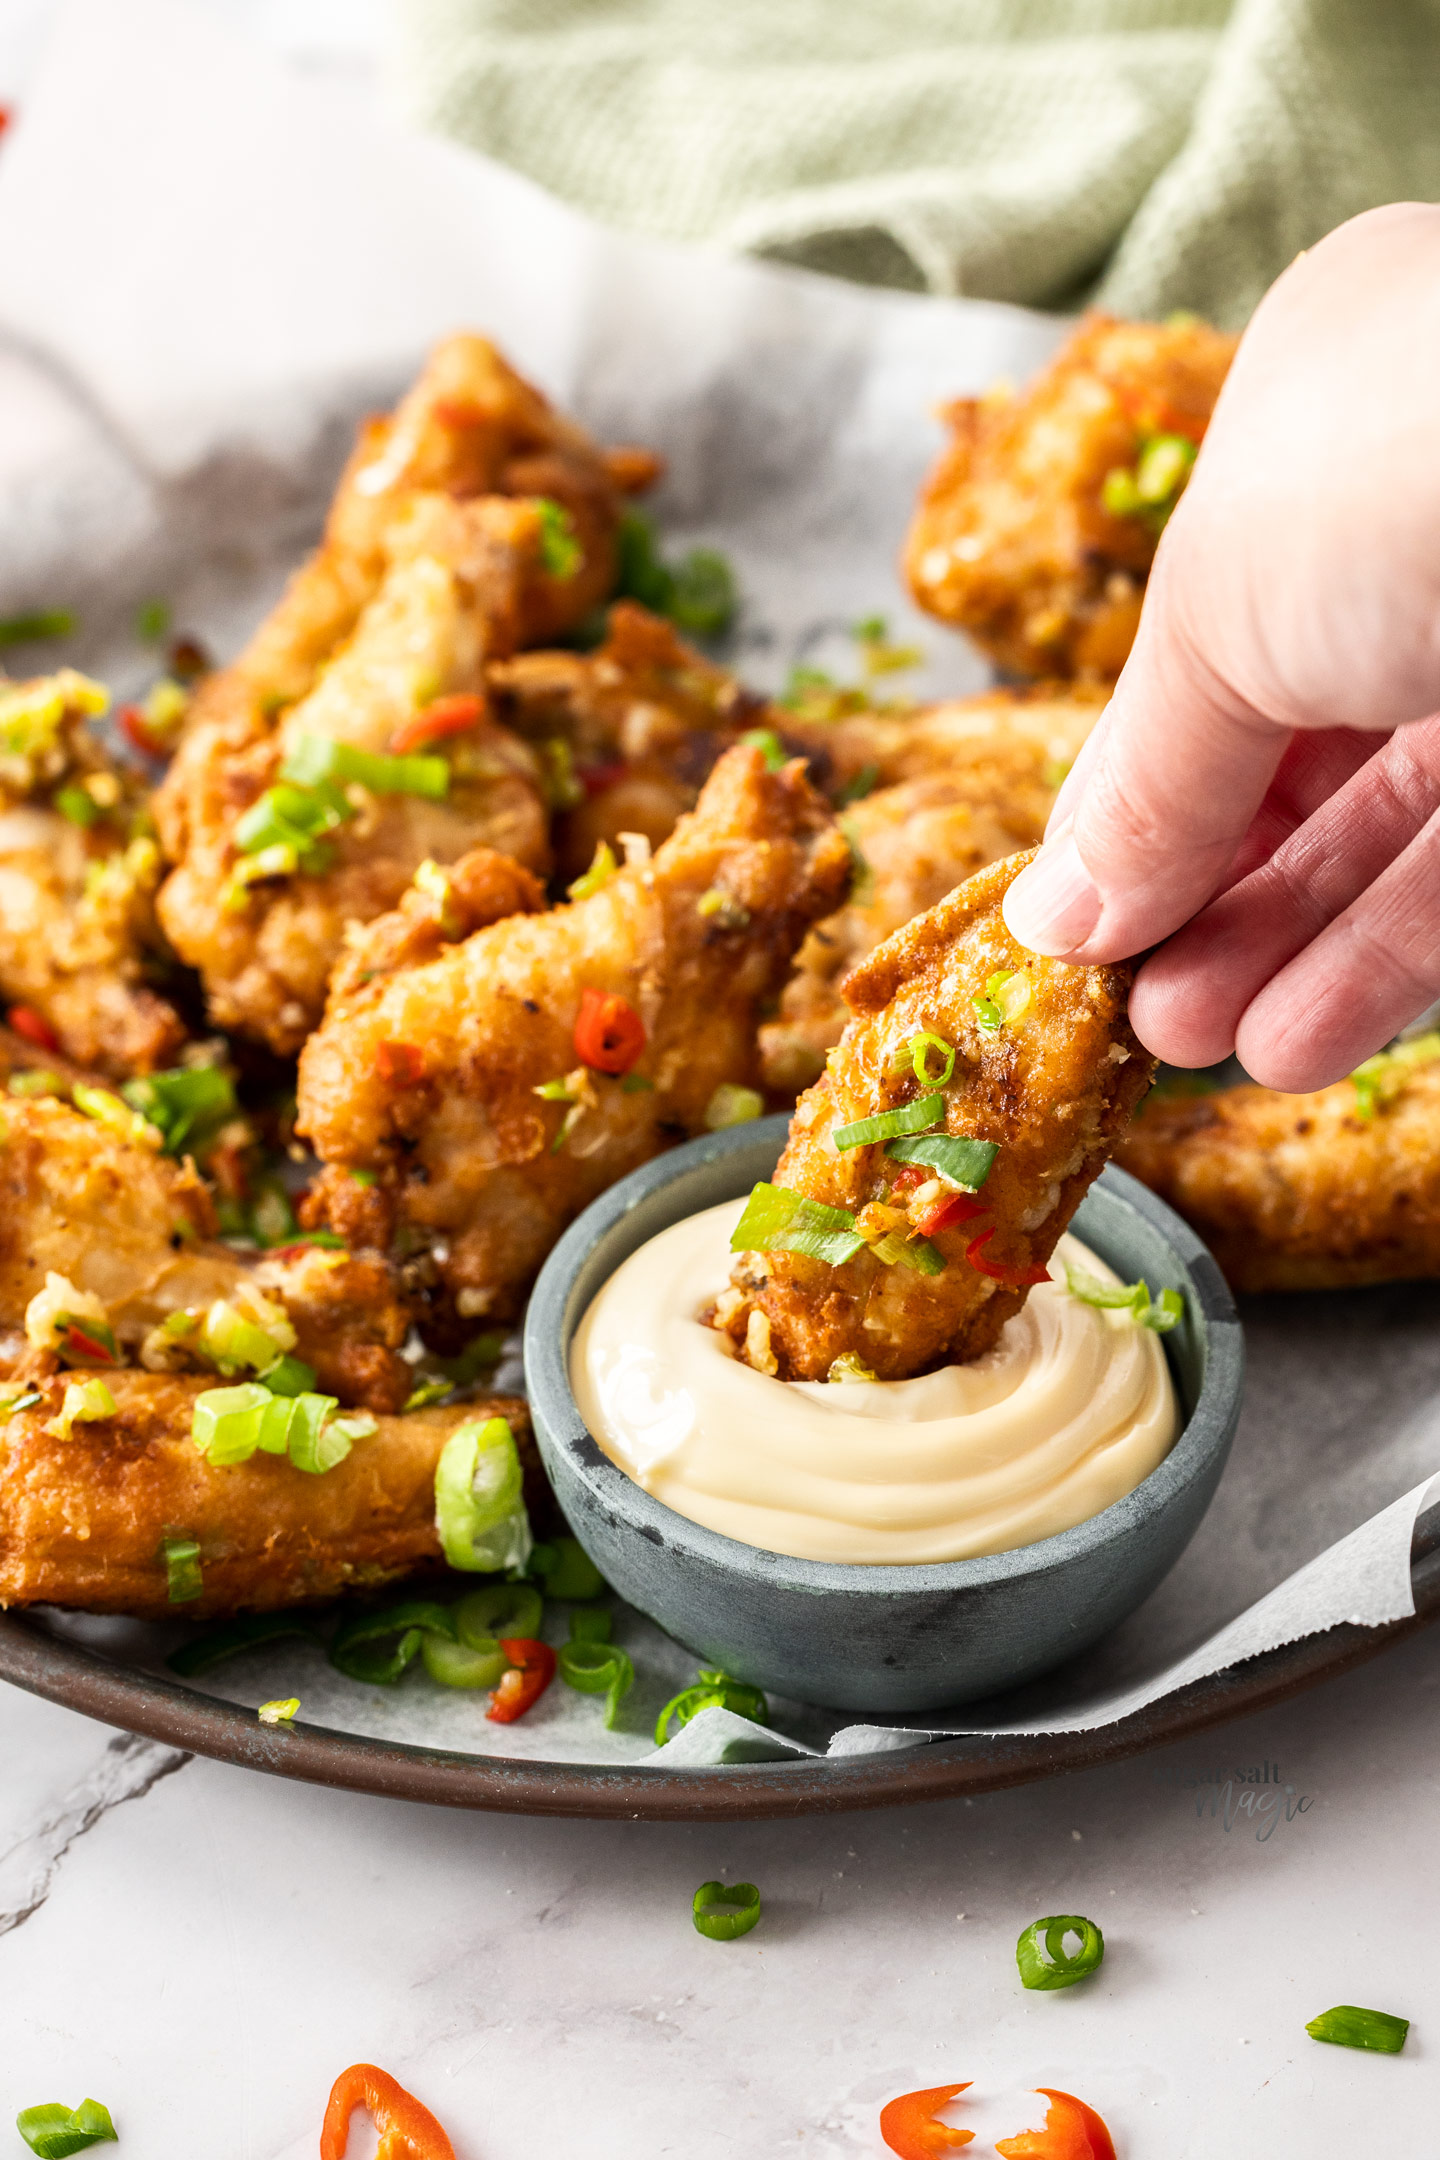 A hand dipping a chicken wing into mayonnaise.